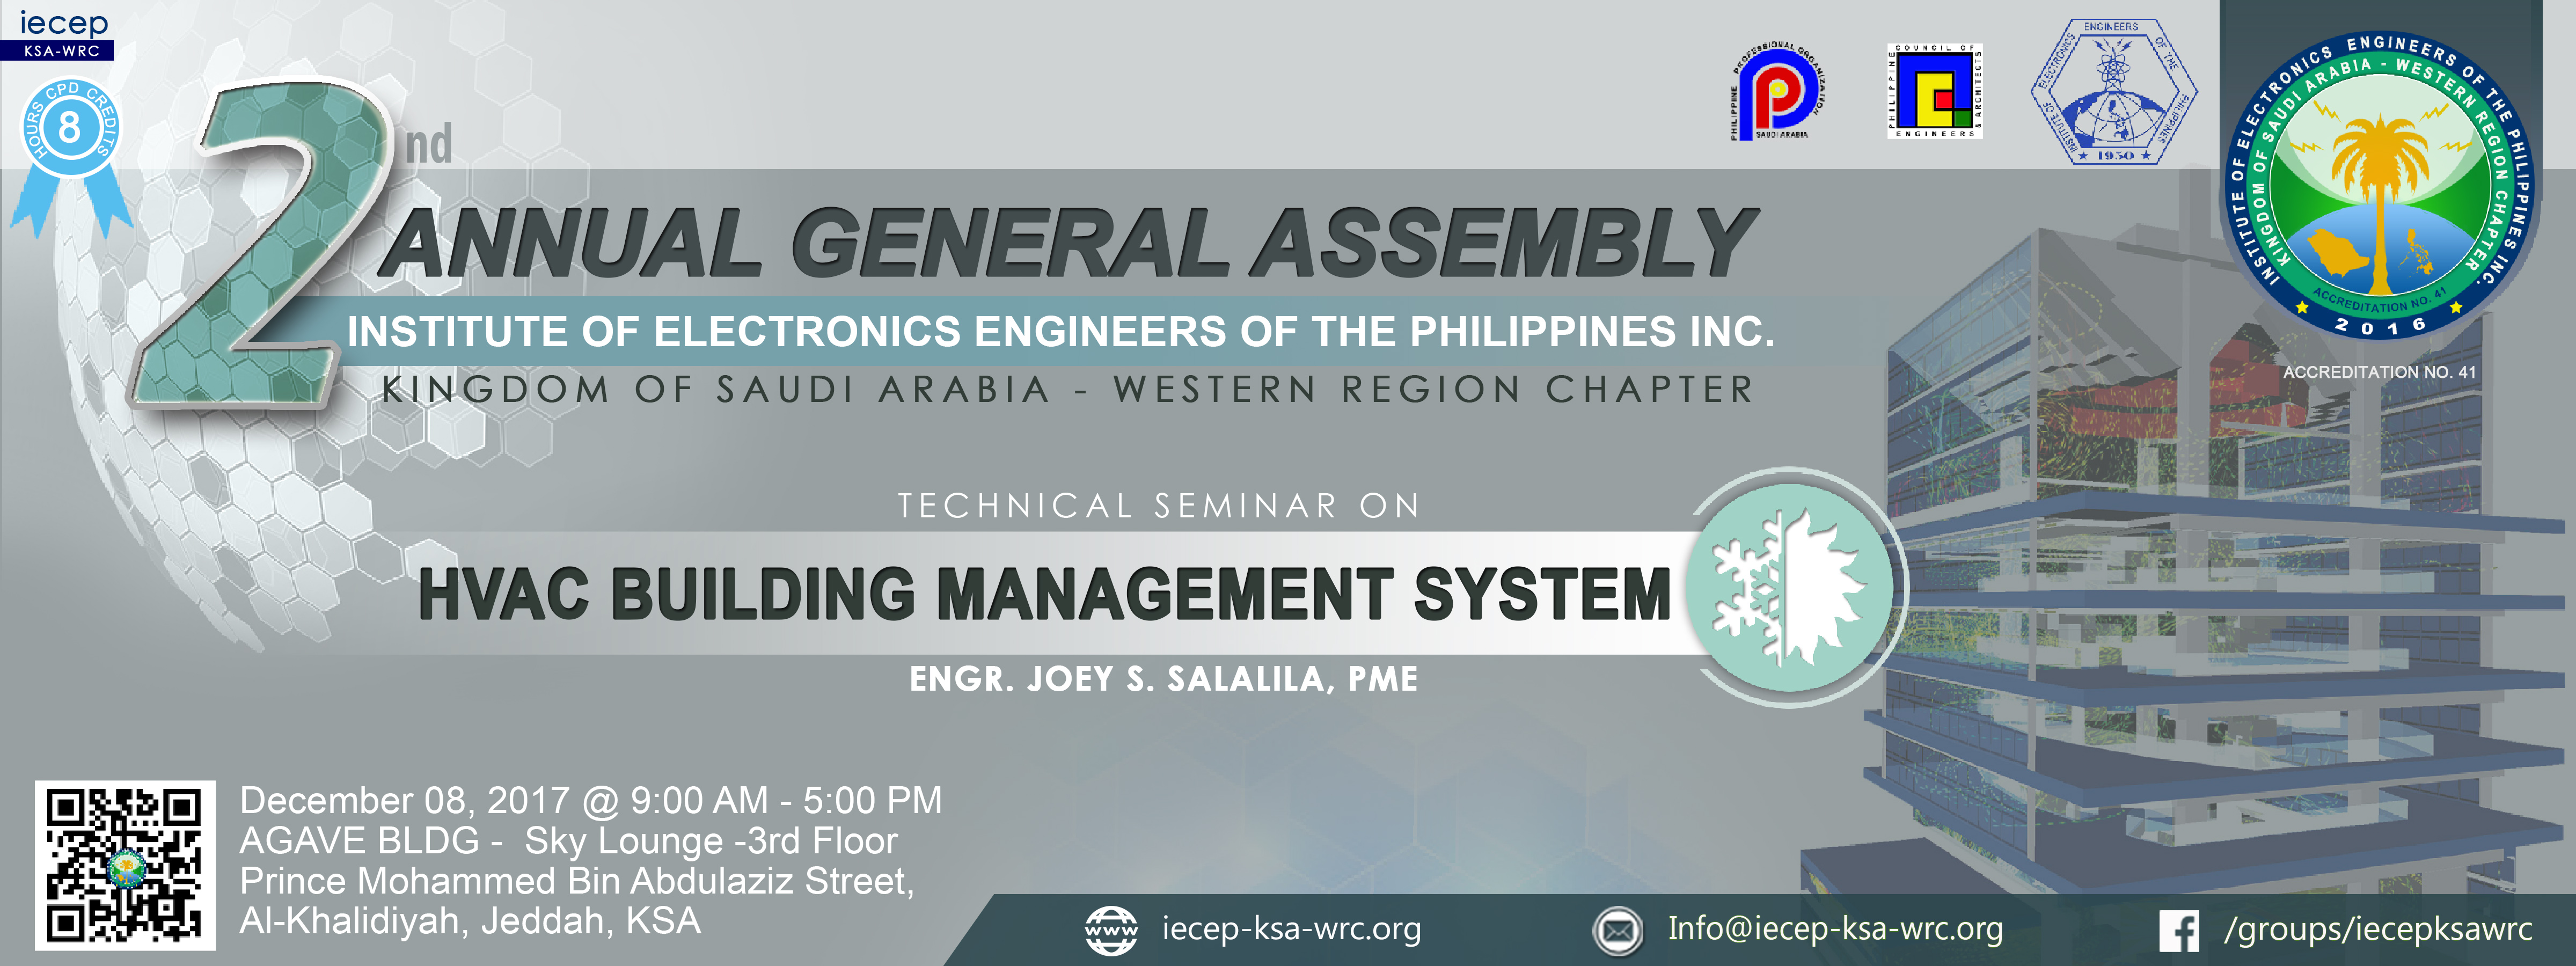 2nd Annual General Assembly / Technical Seminar on HVAC Building Management System